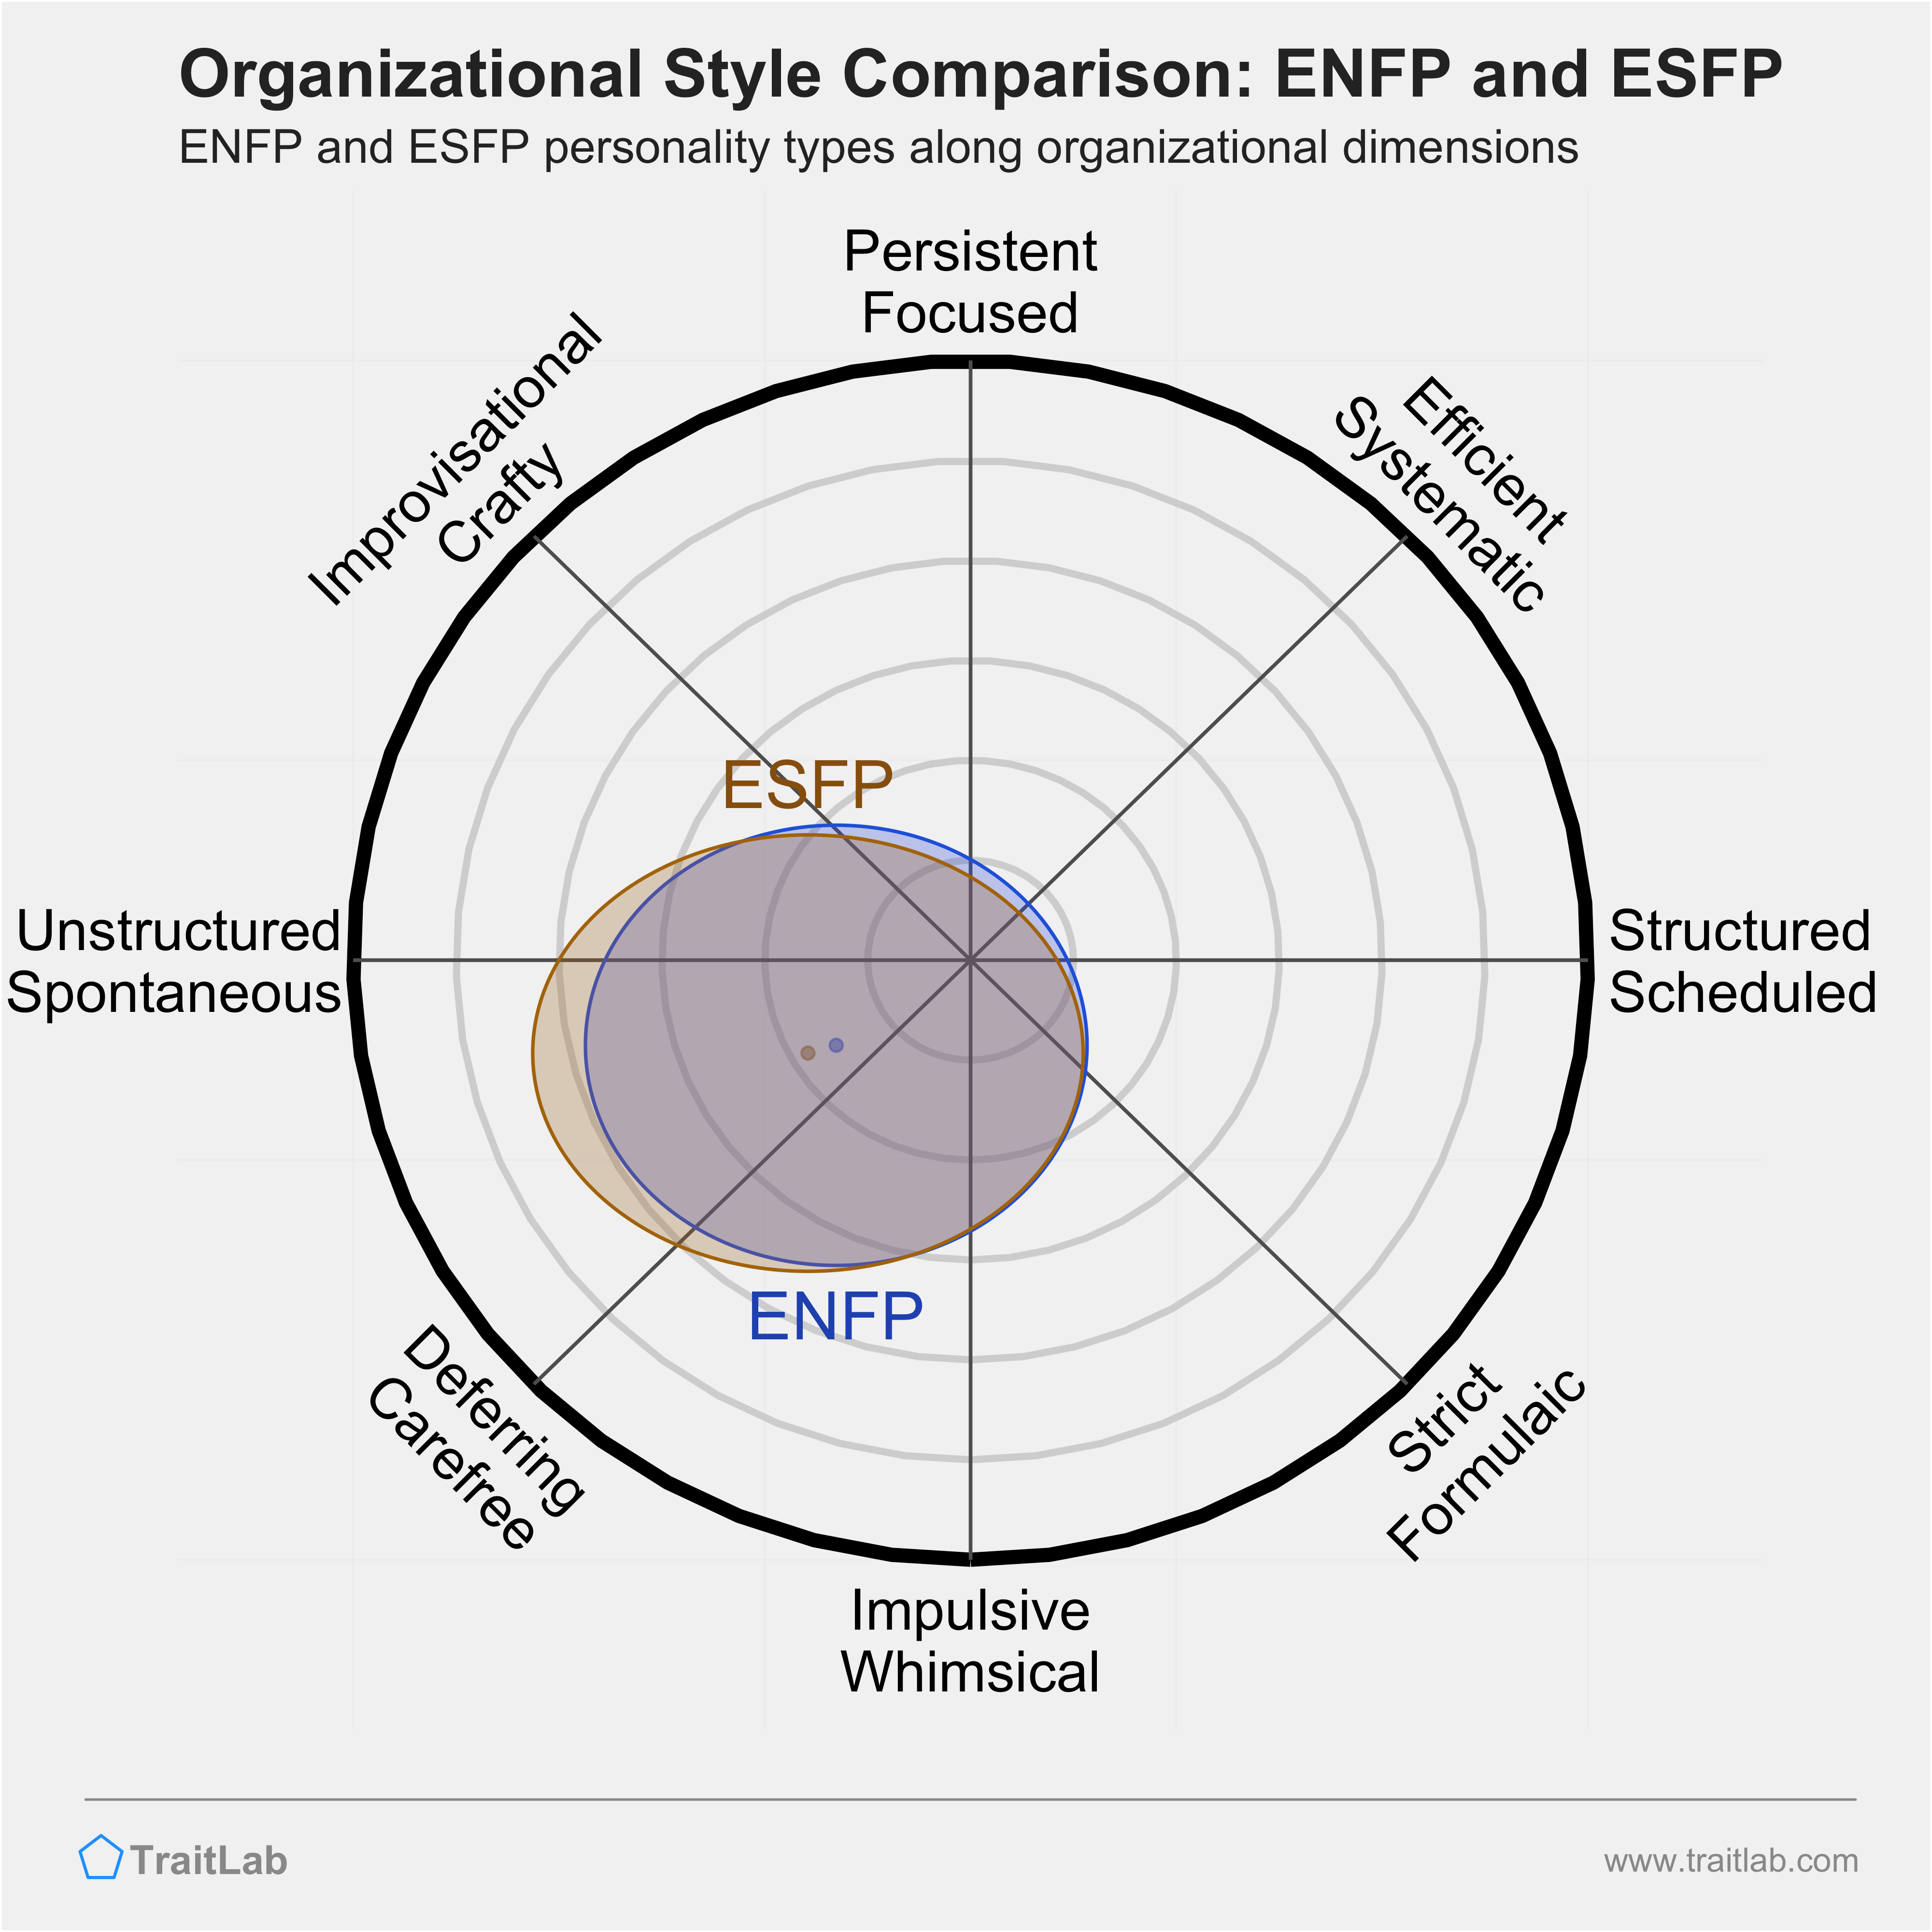 ENFP and ESFP comparison across organizational dimensions